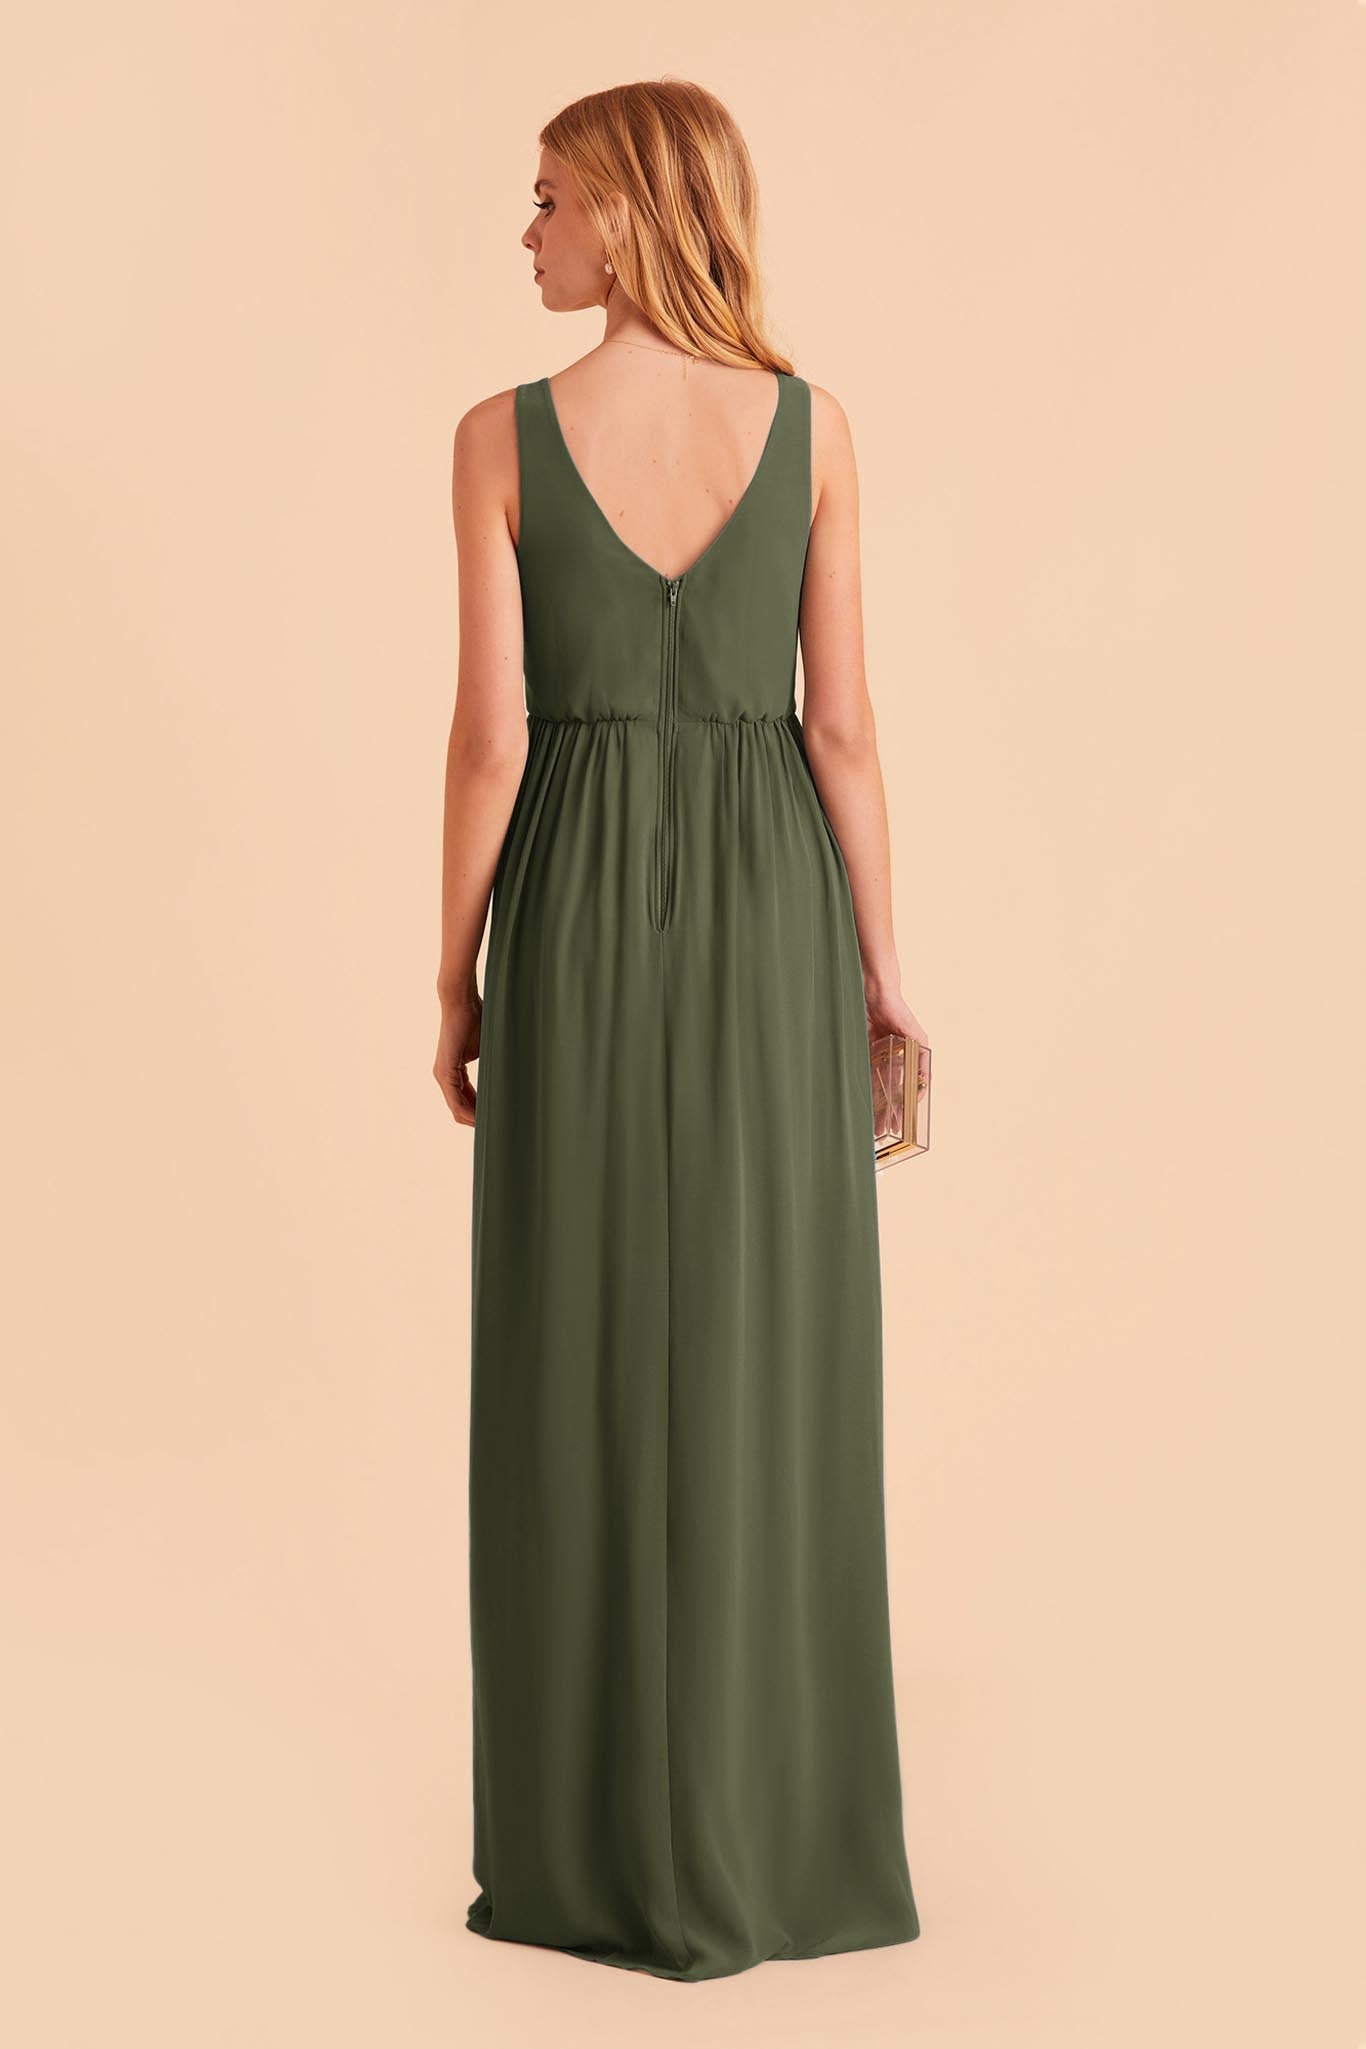 Olive Laurie Empire Dress by Birdy Grey